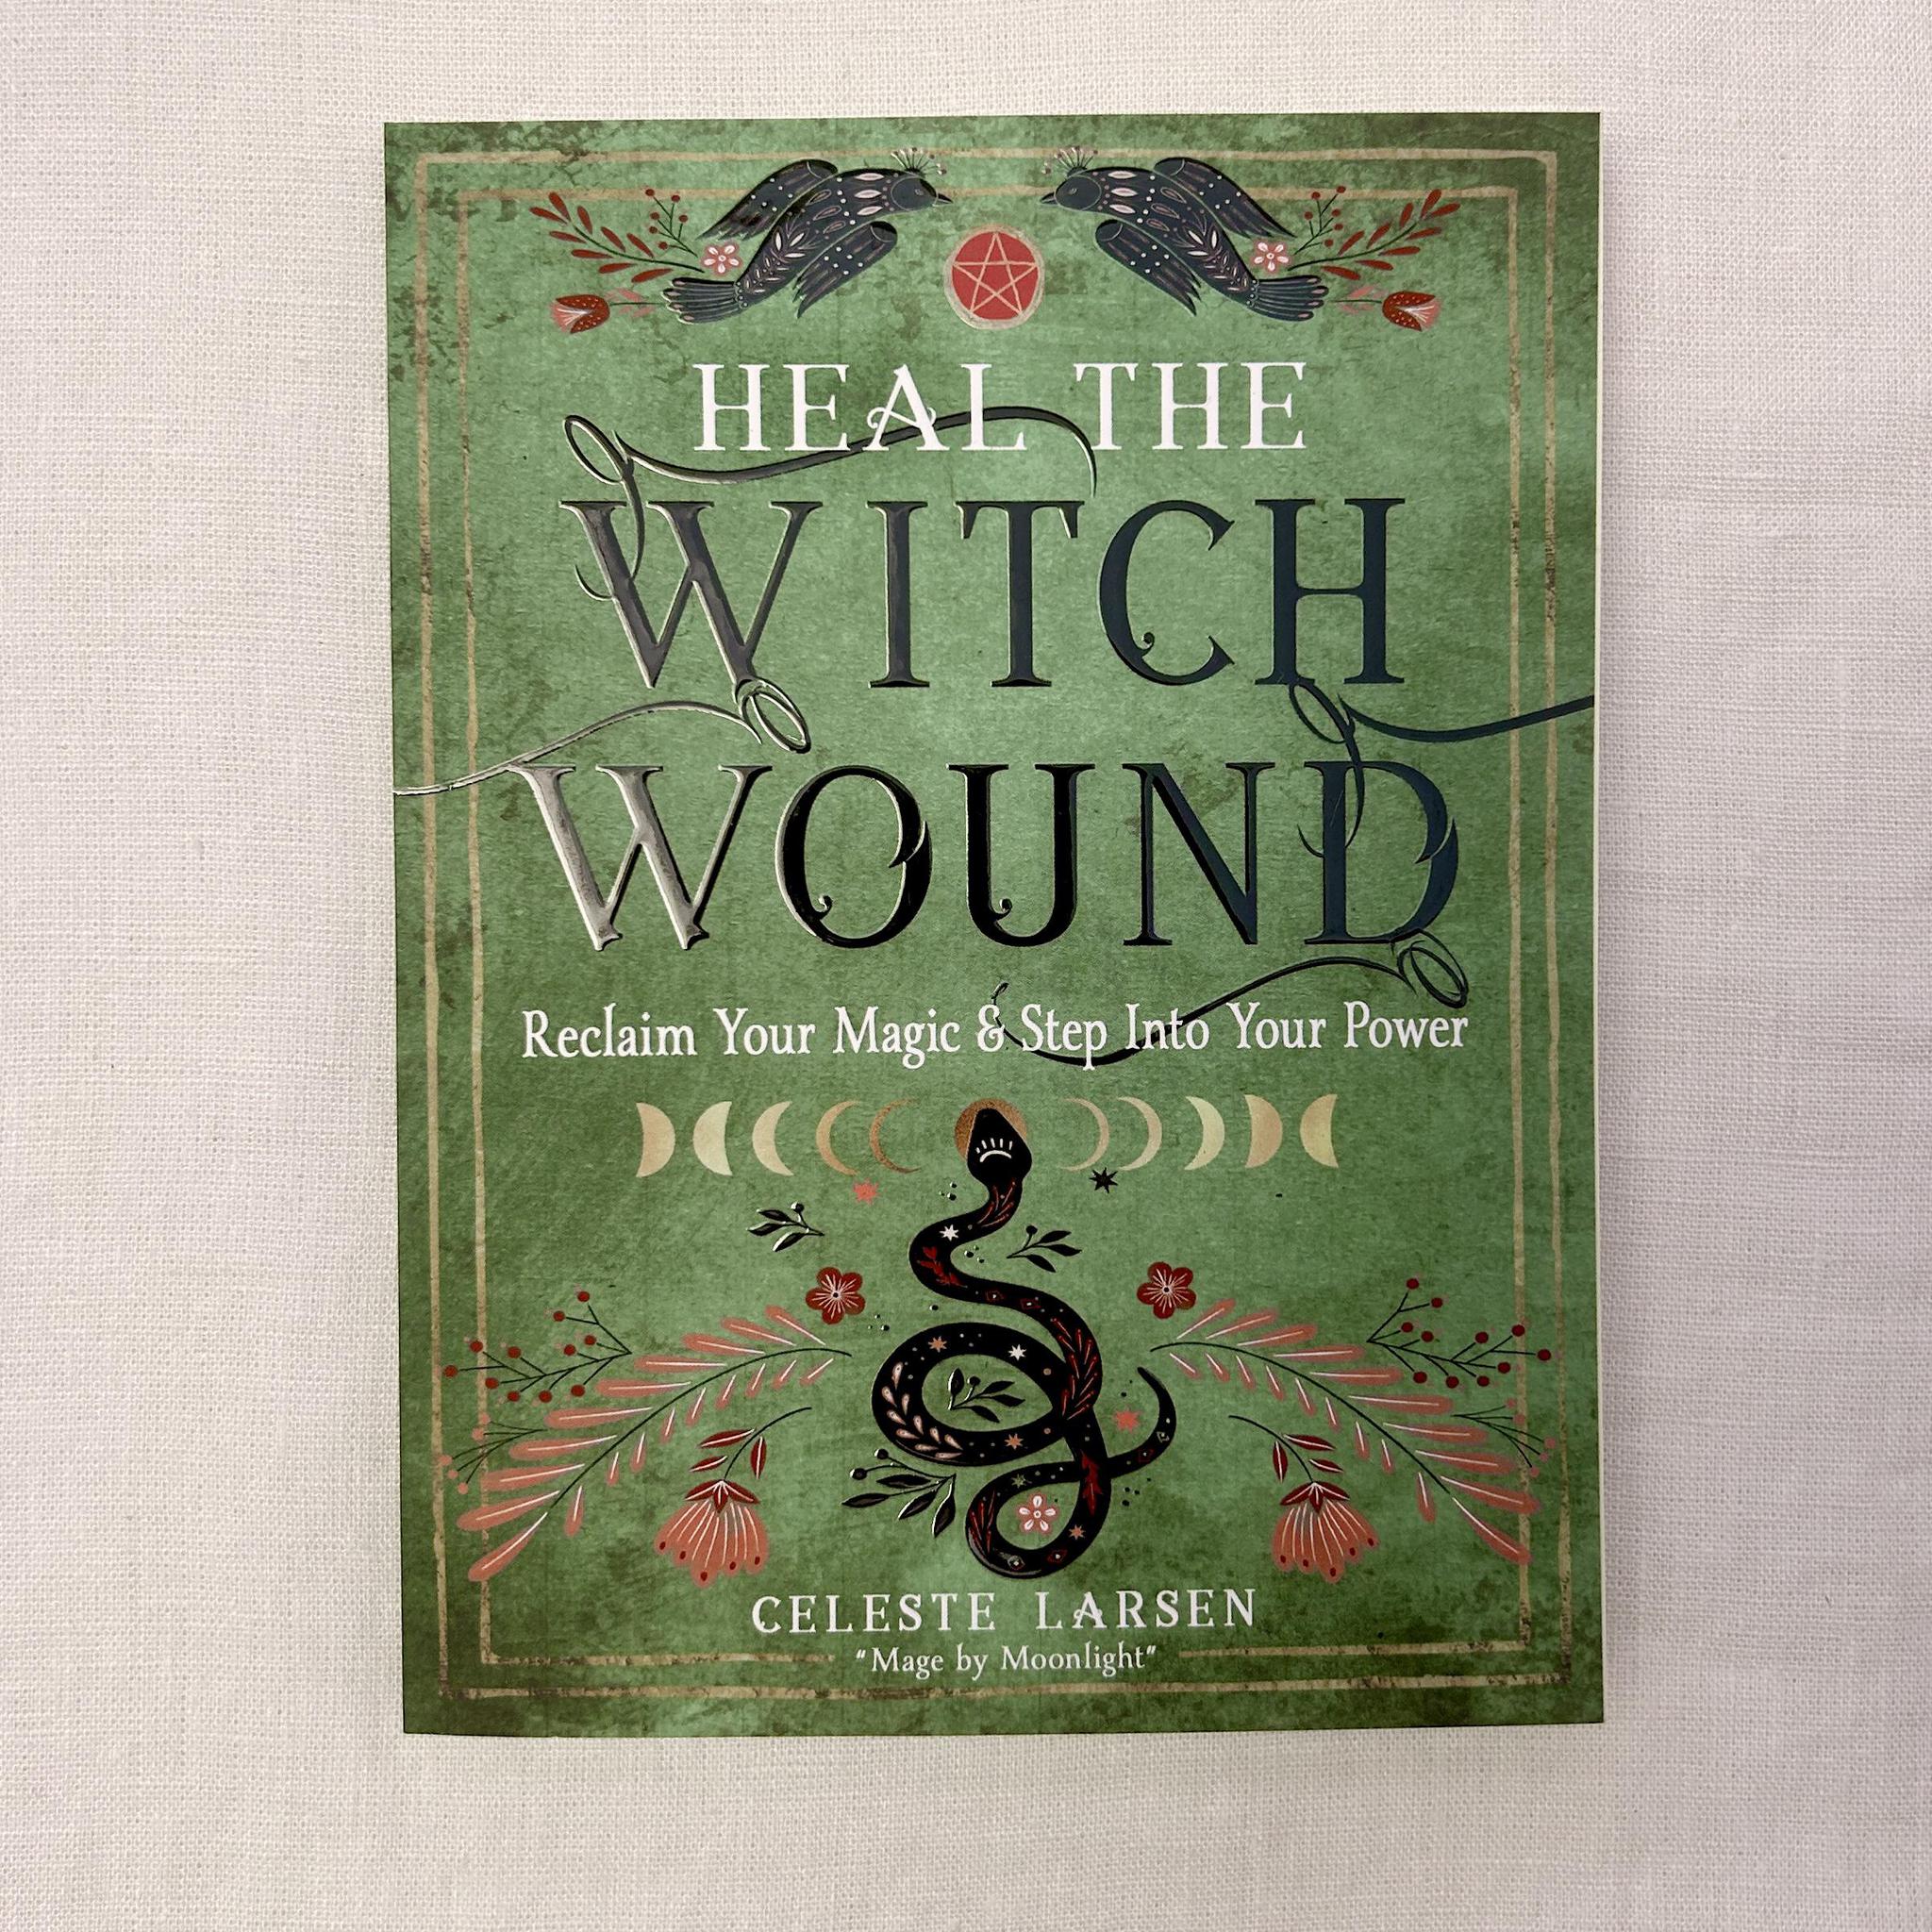 Heal The Witch Wound books: reclain your magic & step into your power